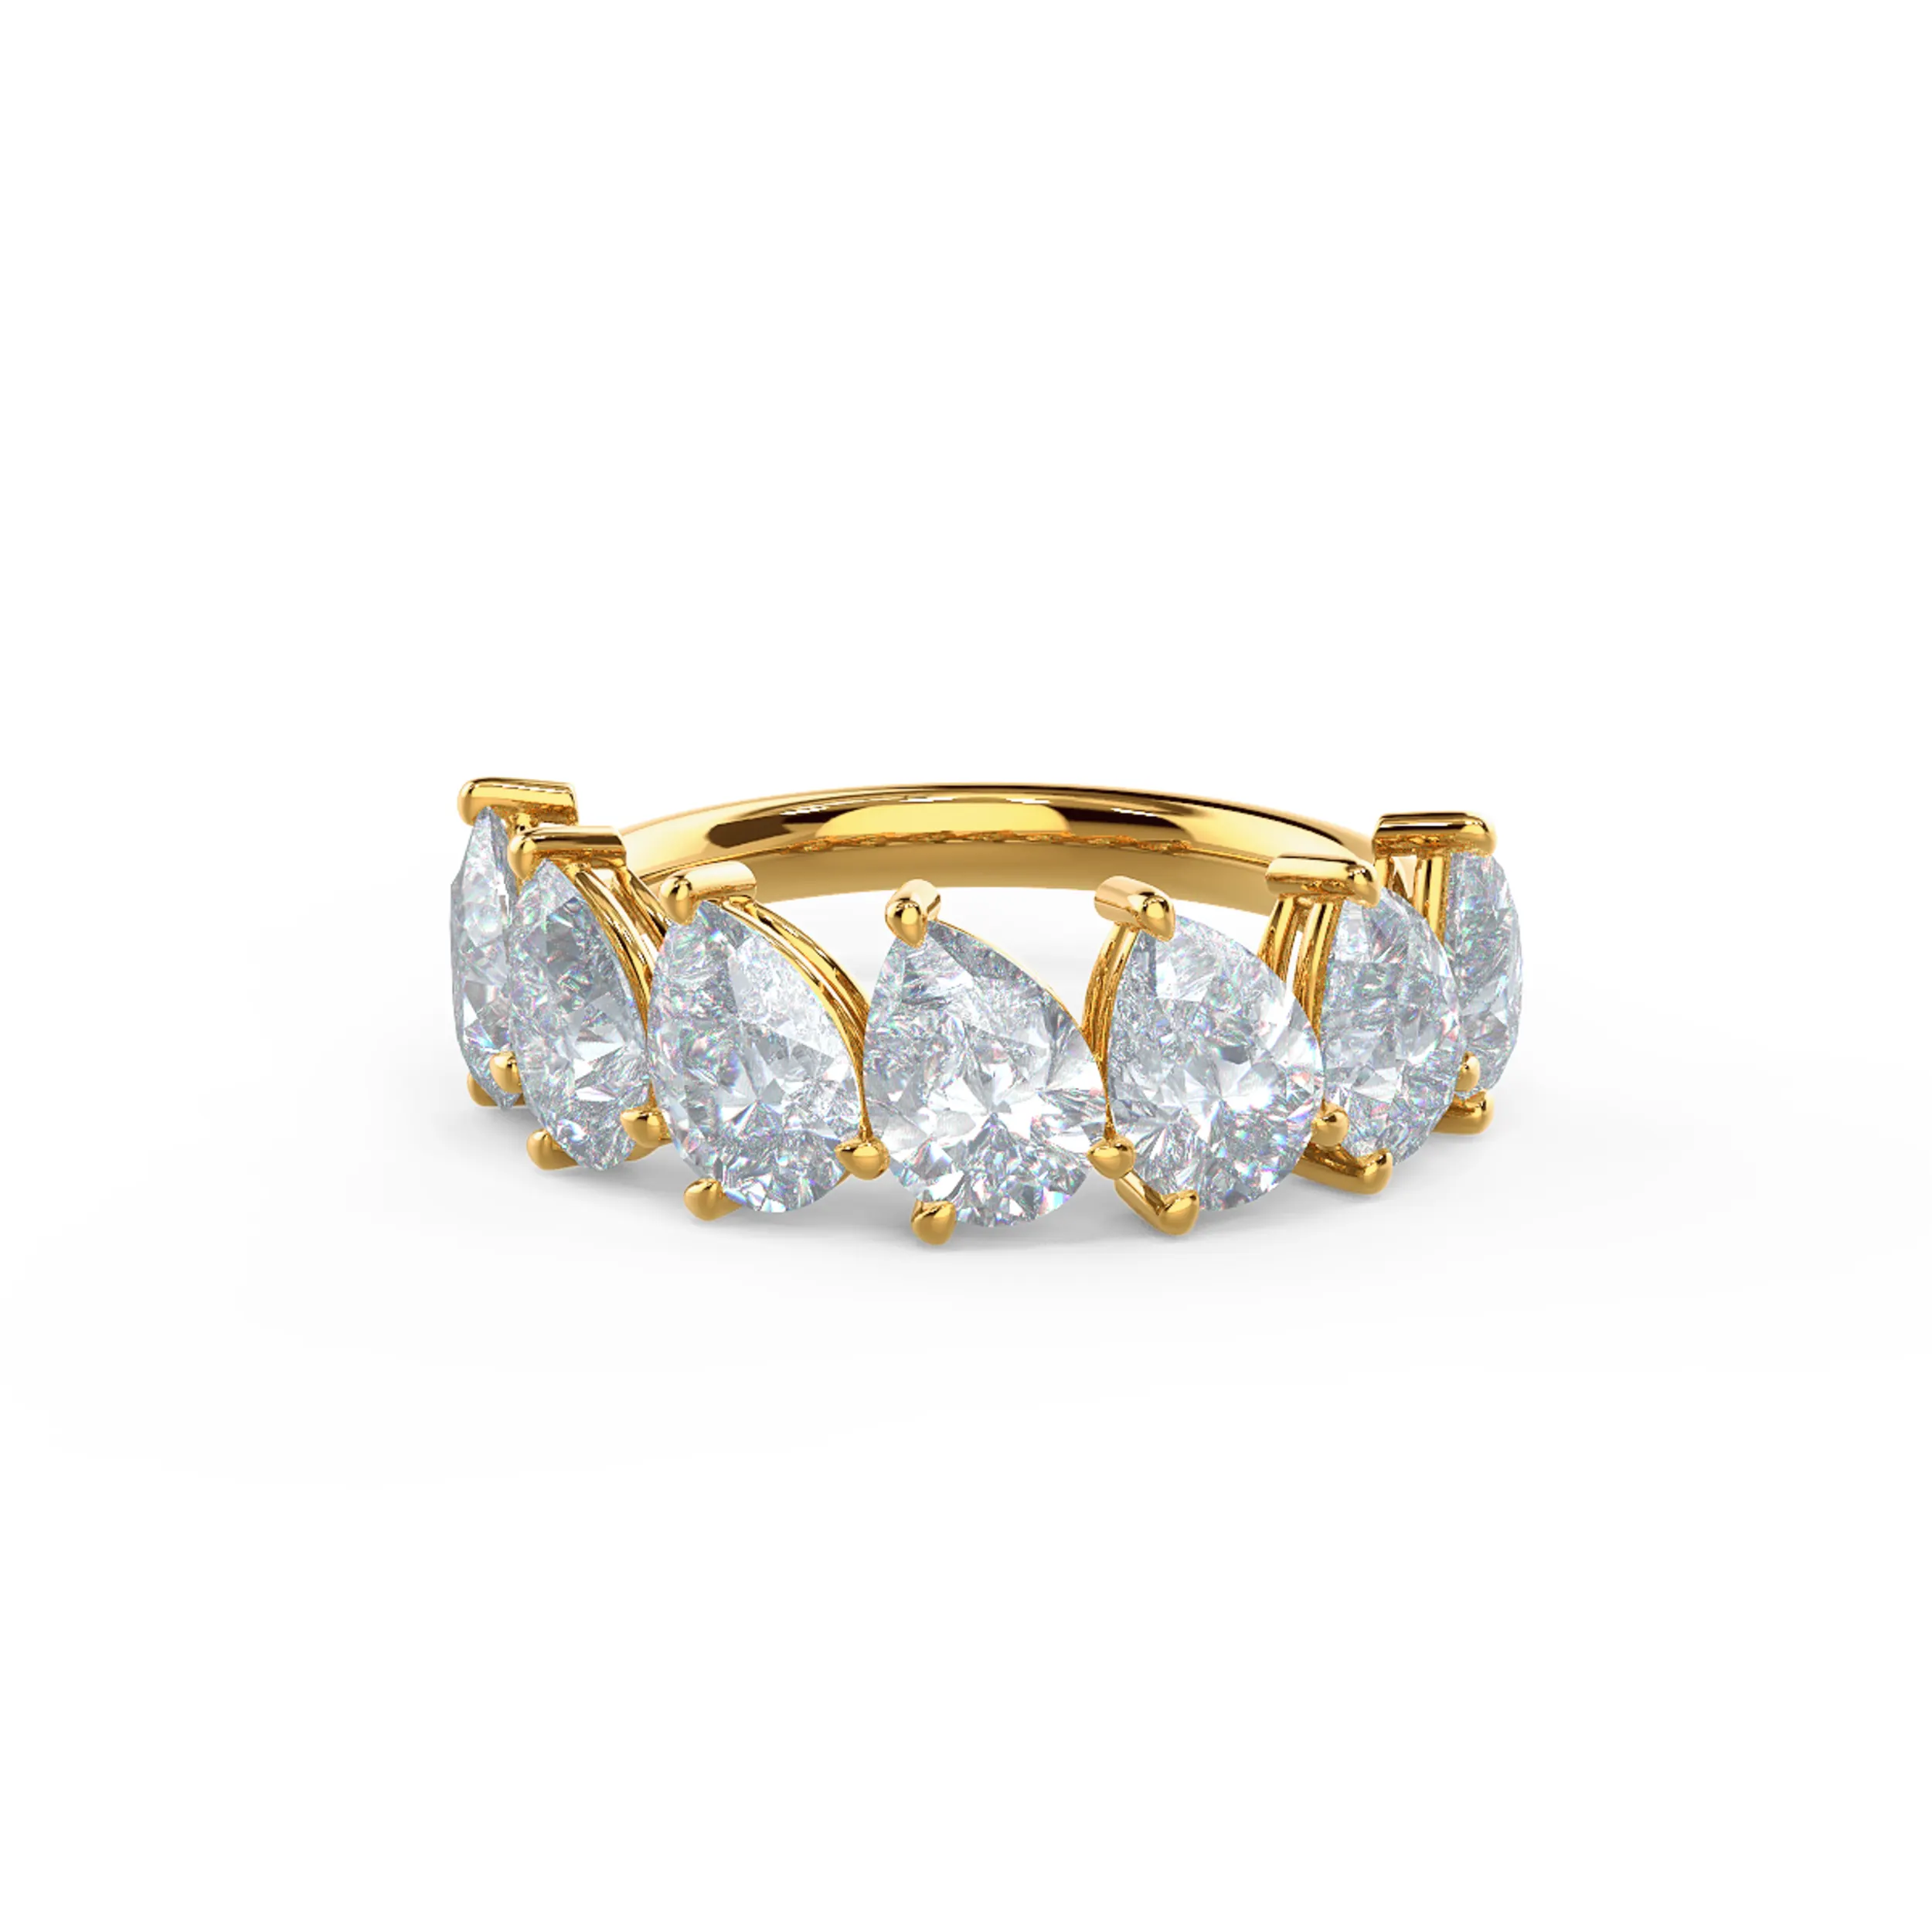 Exceptional Quality 3.5 ct Diamonds set in 18k Yellow Gold Pear Angled Seven Stone (Main View)